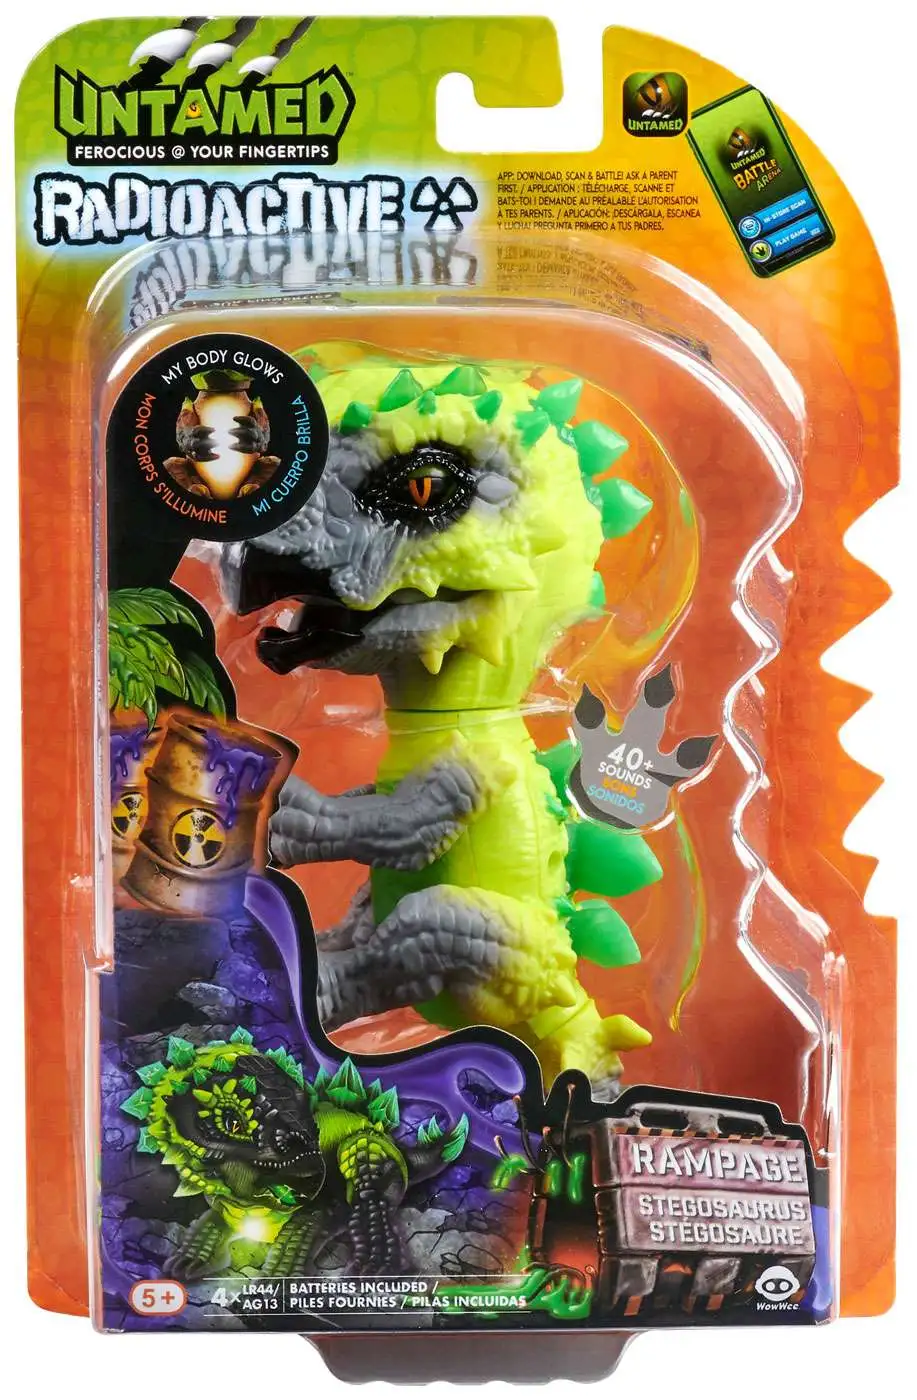 Details about   Untamed Radioactive Fingerlings 3 Piece Set Dinosaurs X-Ray Rampage Gamma 